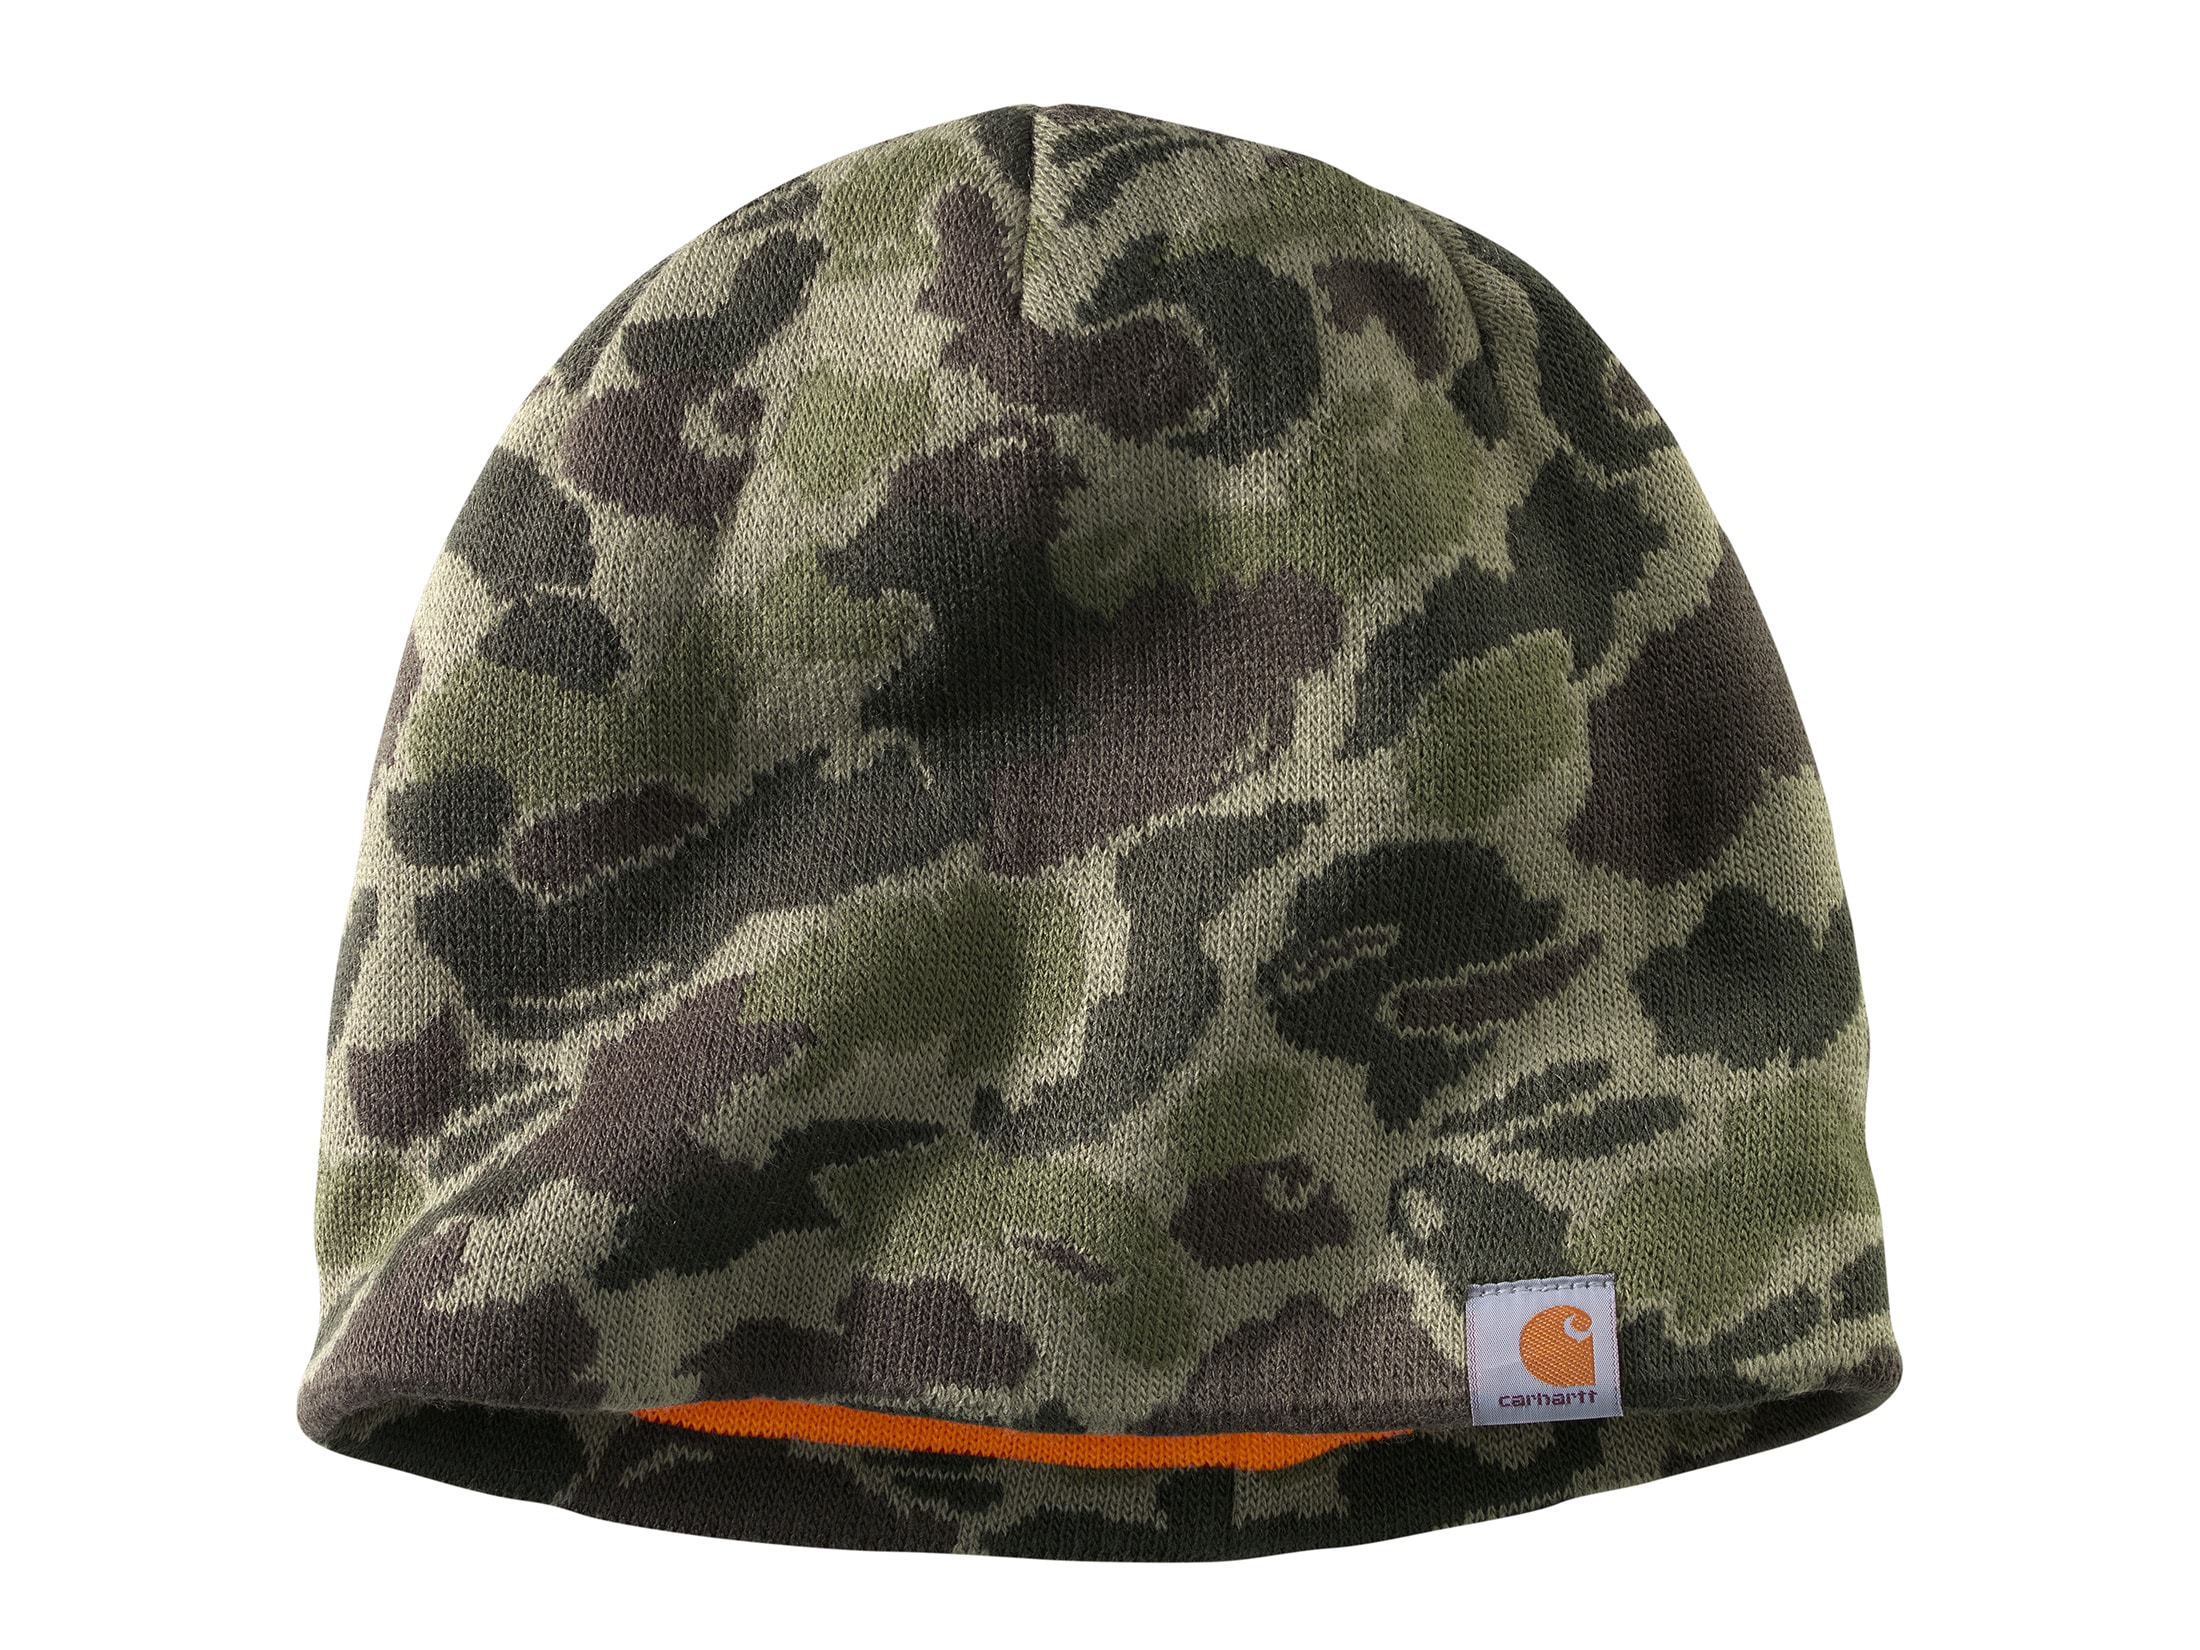 Carhartt Montgomery Reversible Beanie Shadow Duck Camo One Size Fits